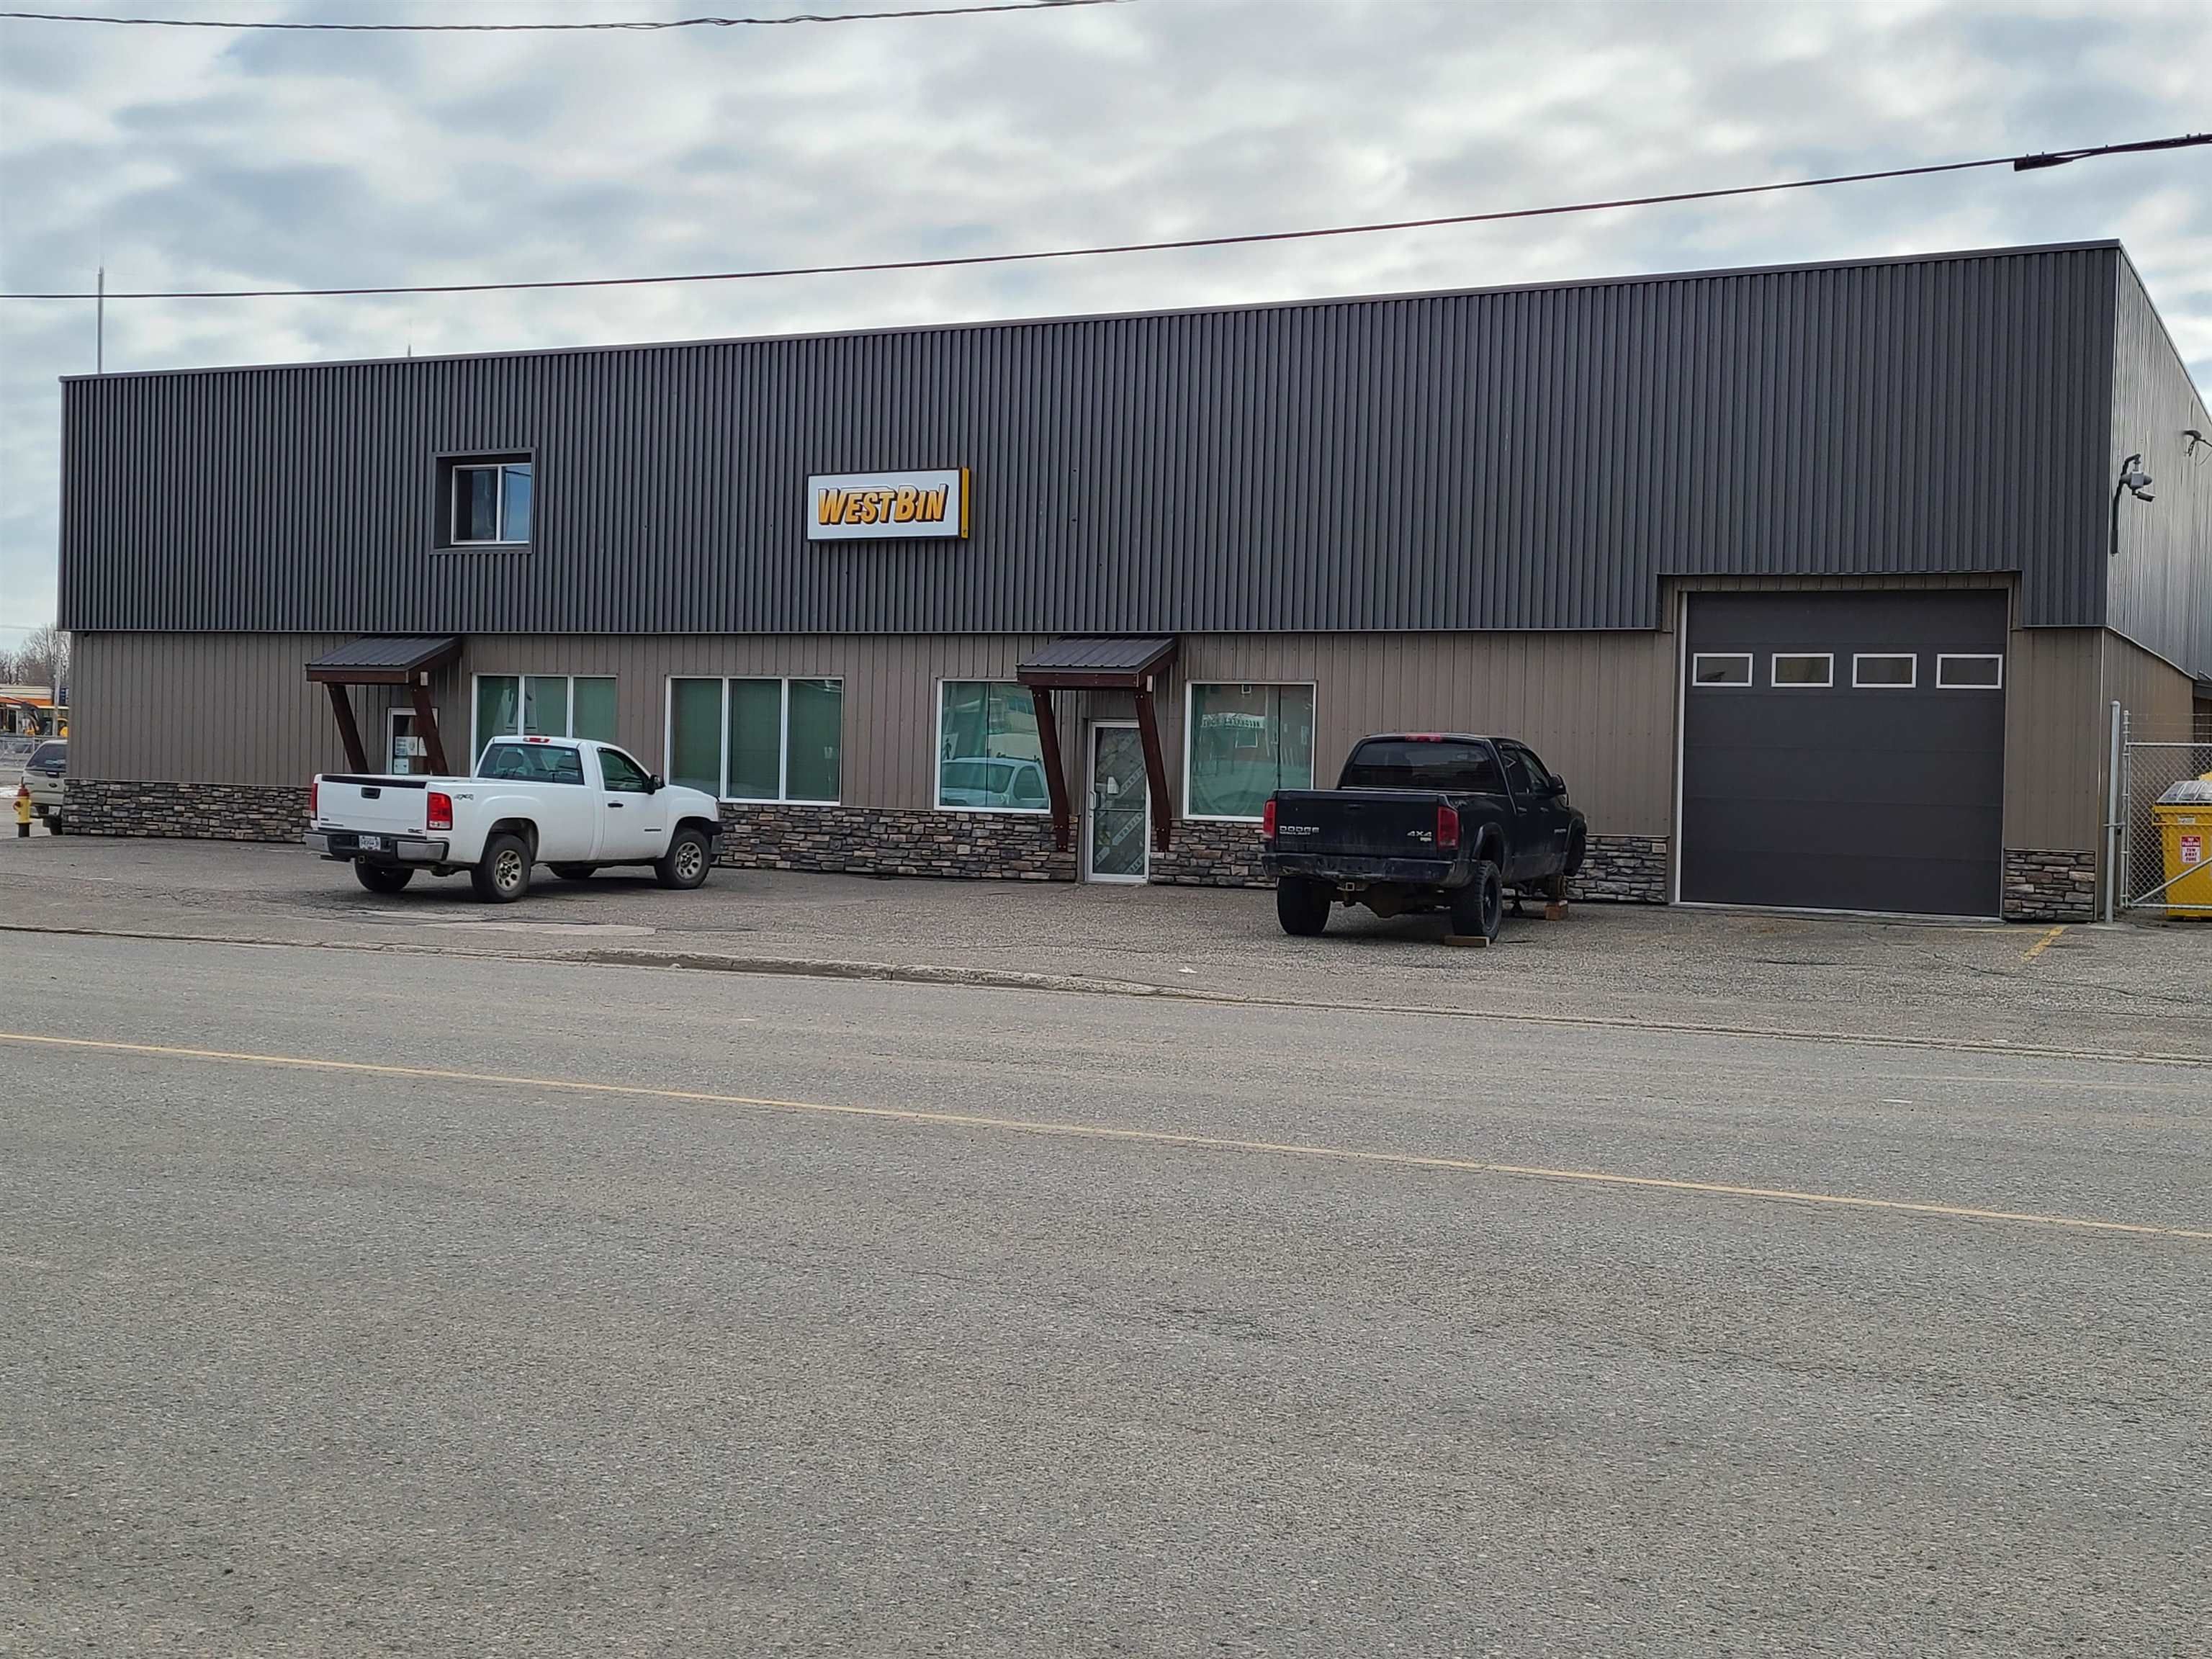 Main Photo: 220 QUEENSWAY Avenue in Prince George: East End Industrial for sale (PG City Central)  : MLS®# C8045176